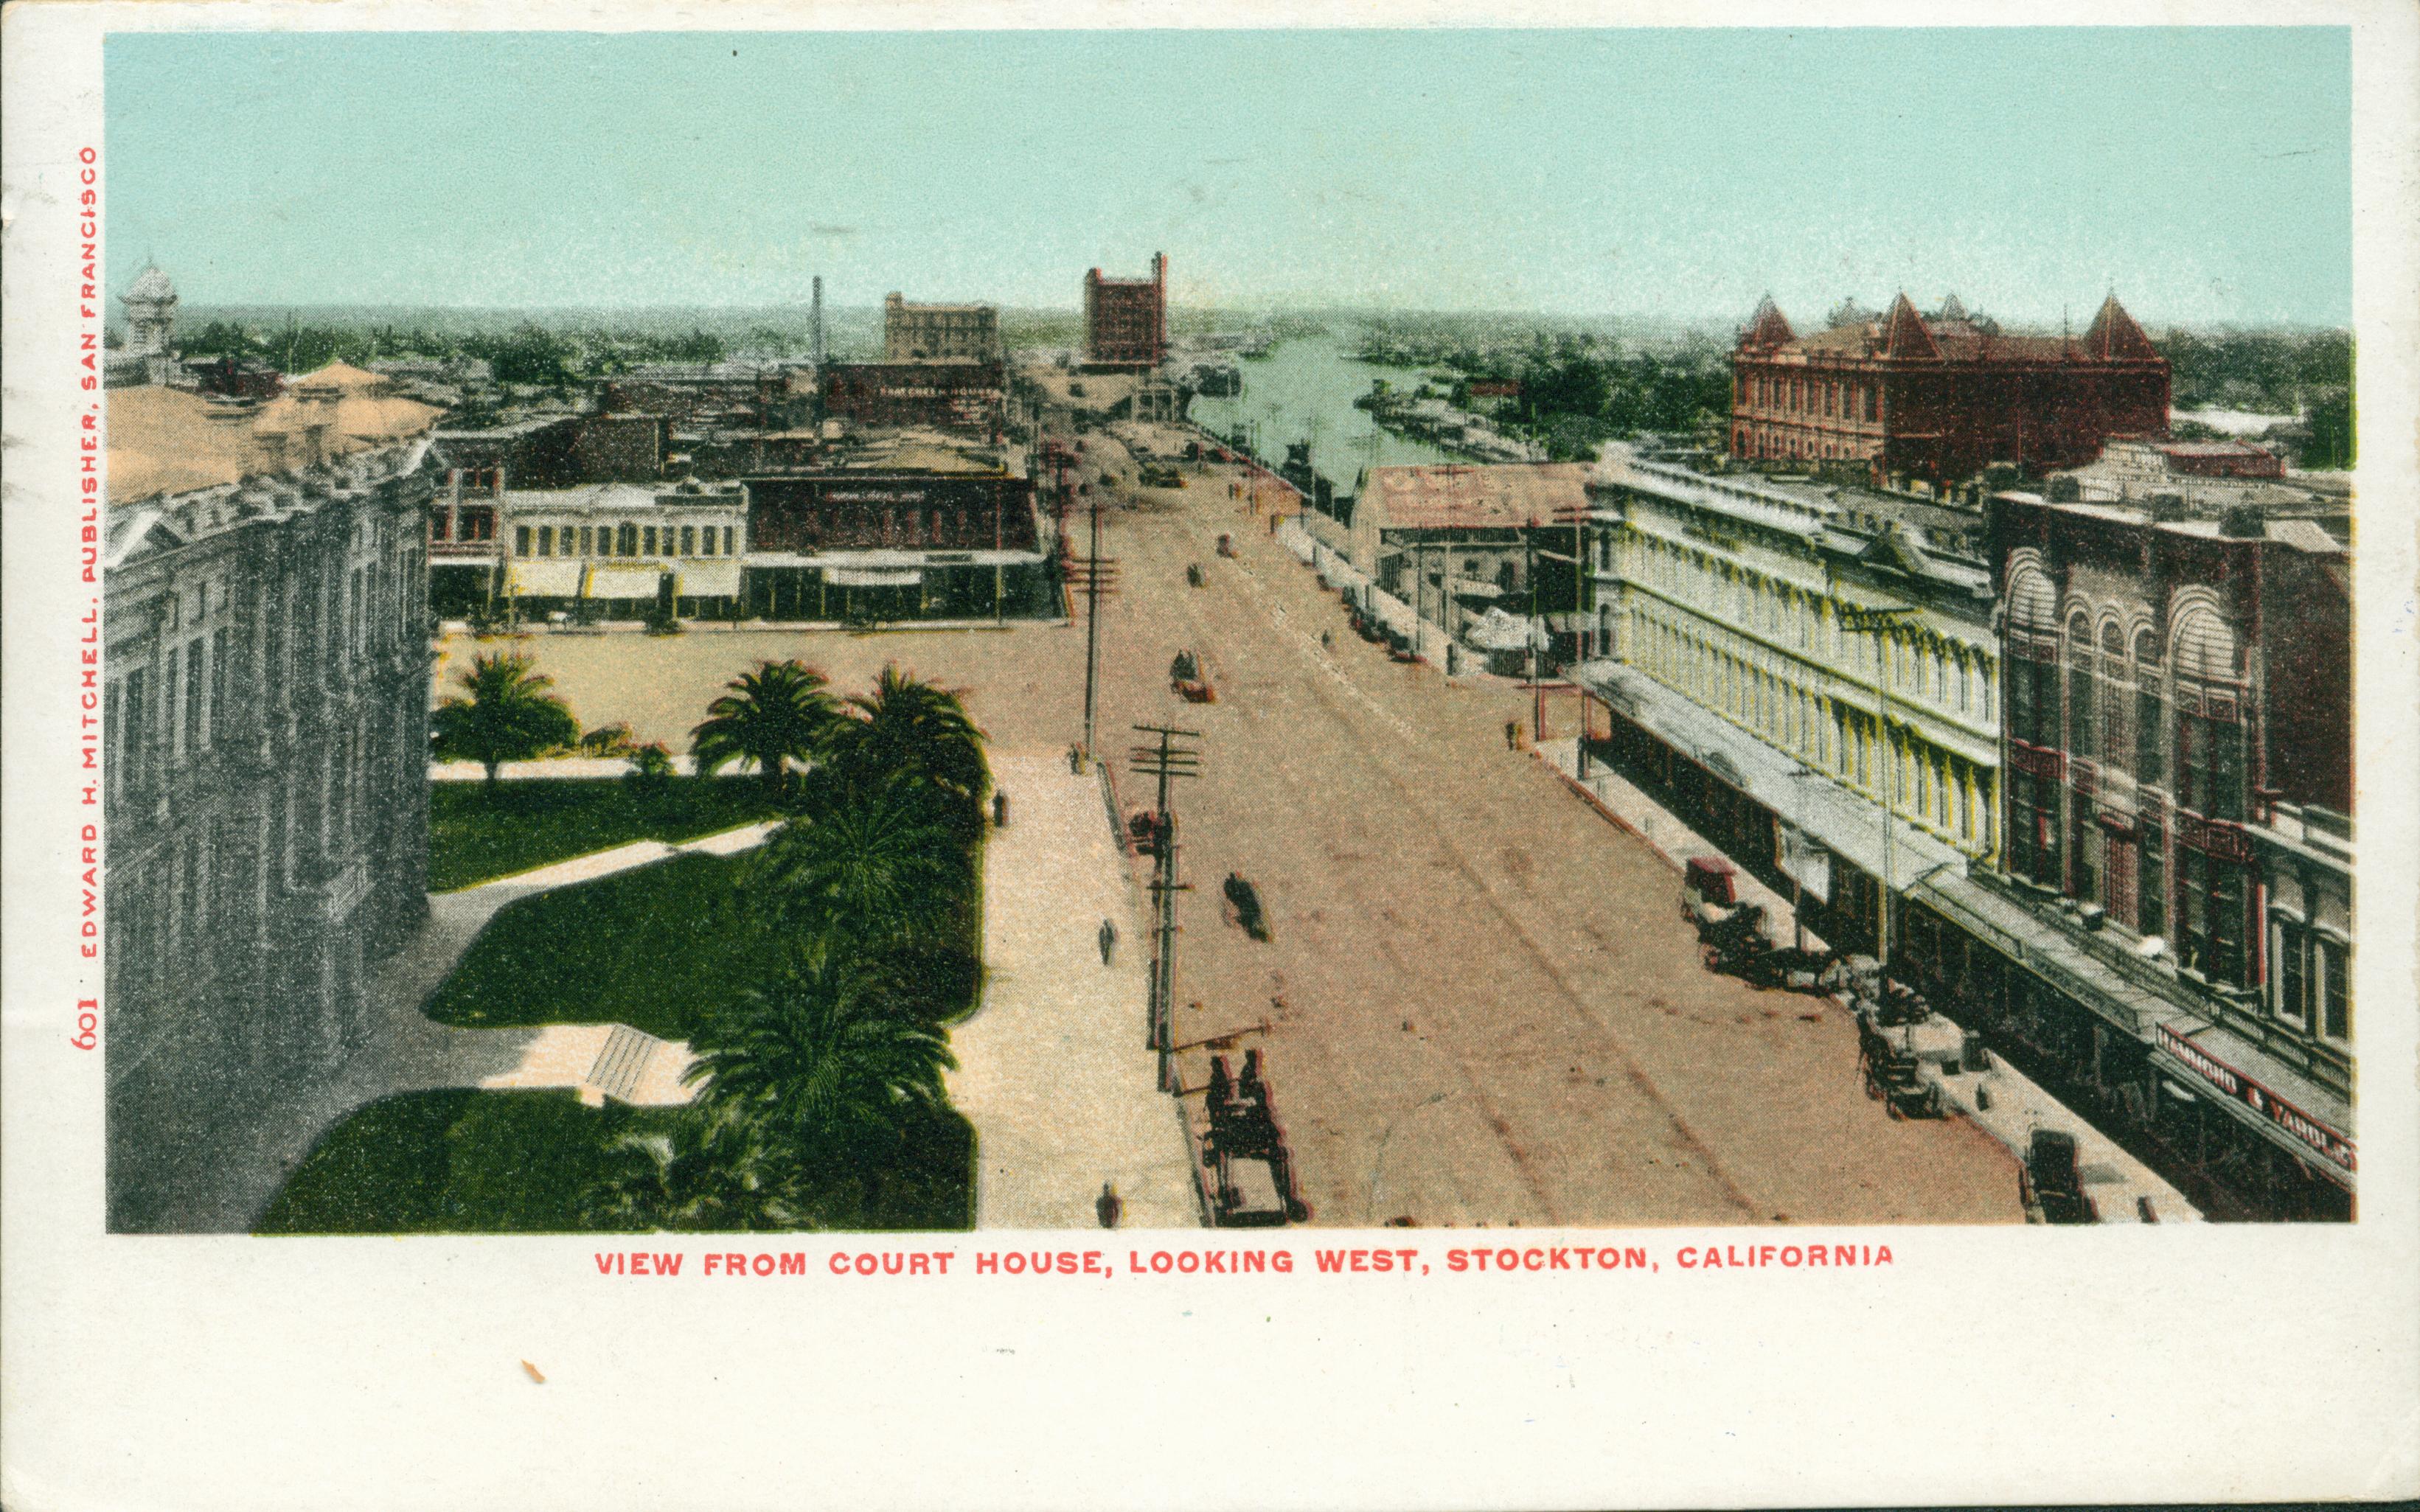 View of Stockton from the Court House, multiple story buildings